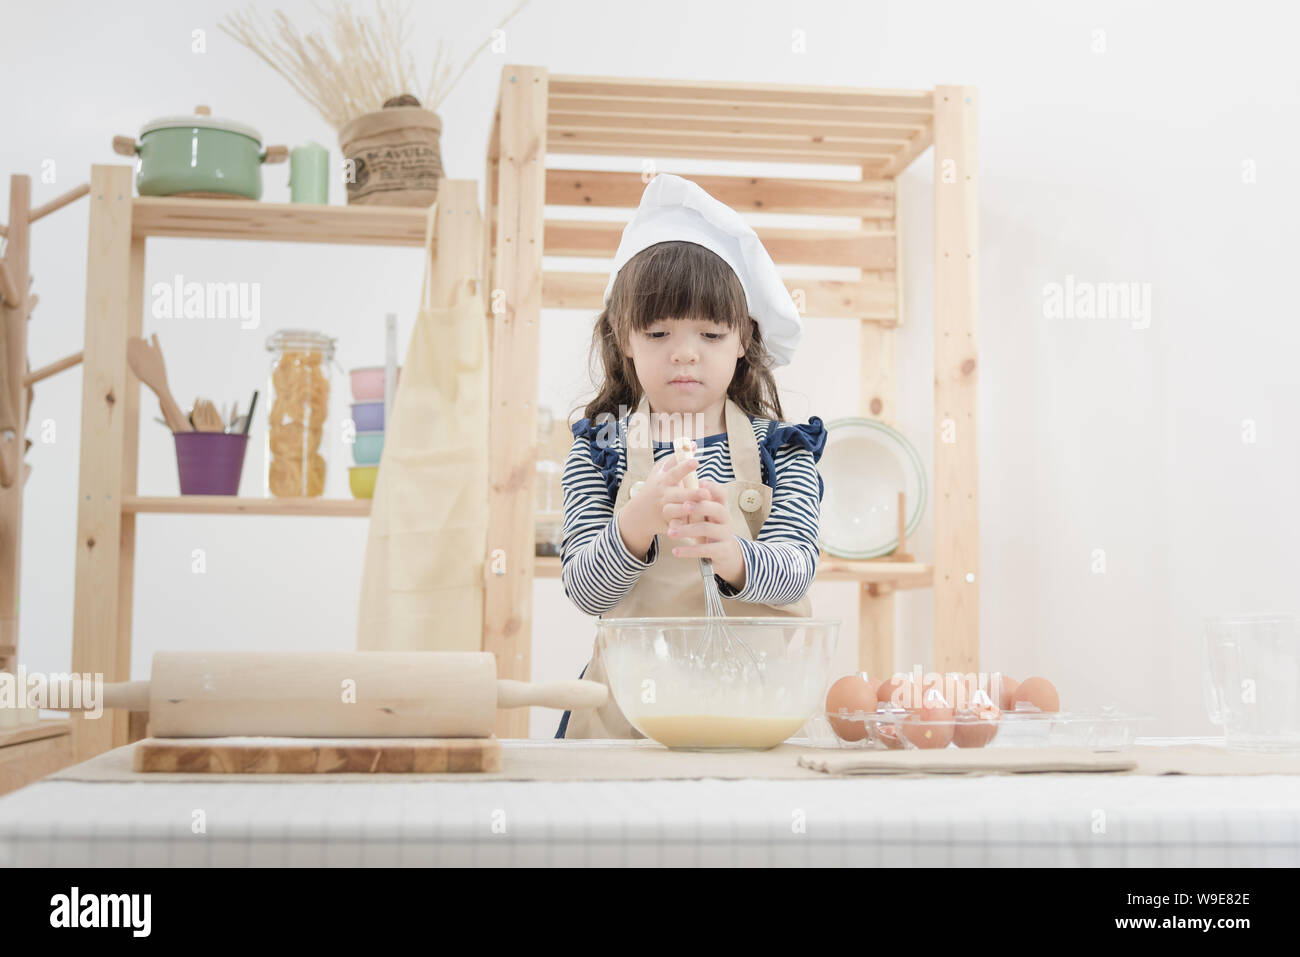 Cute kid enjoy preparing the dough to make a cake in the kitchen room.Photo series of Happy family concept. Stock Photo